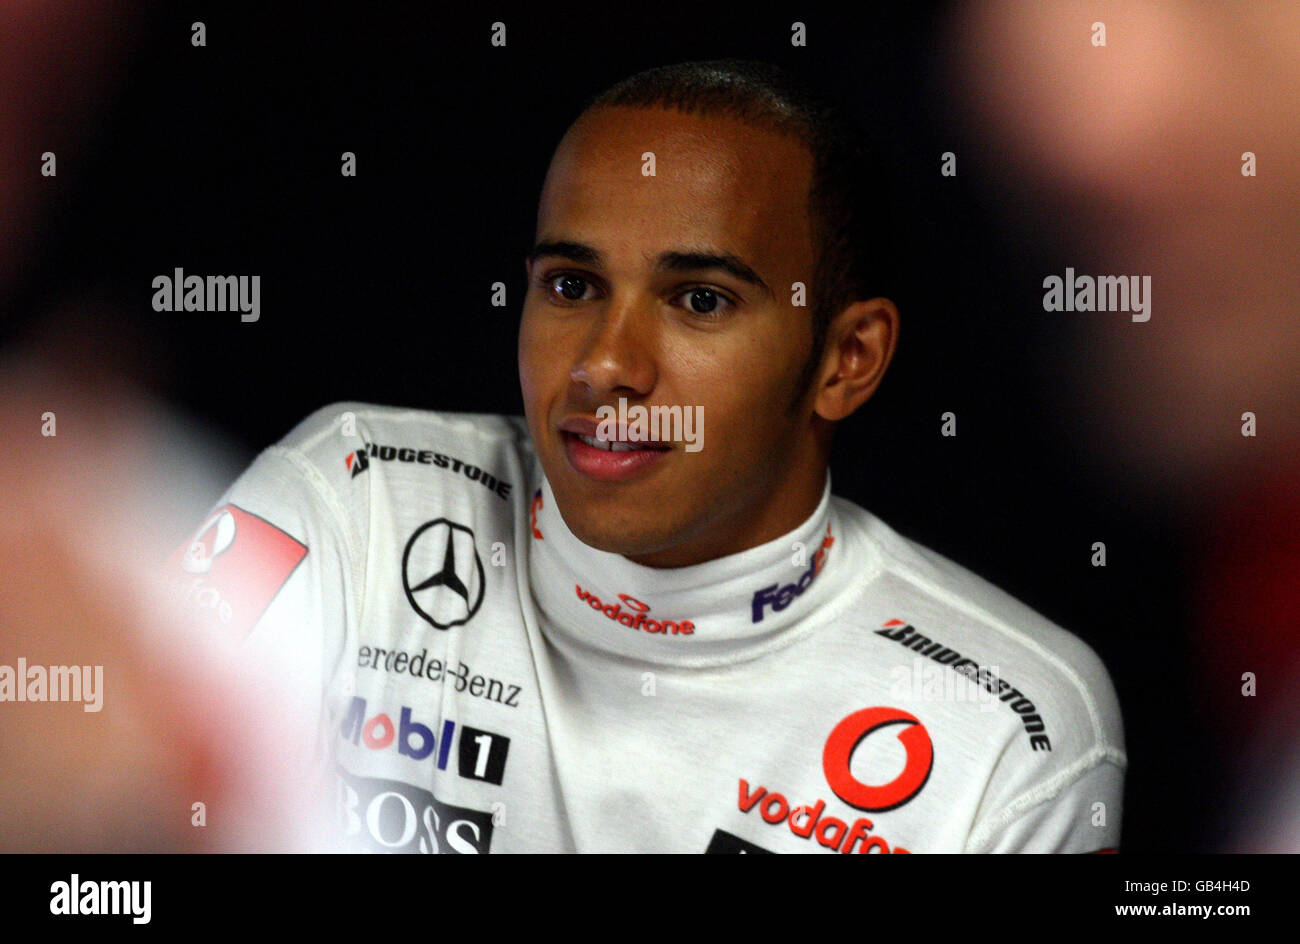 Great Britain's Lewis Hamilton waits in the garage during a practice session at Monza, Italy. Stock Photo